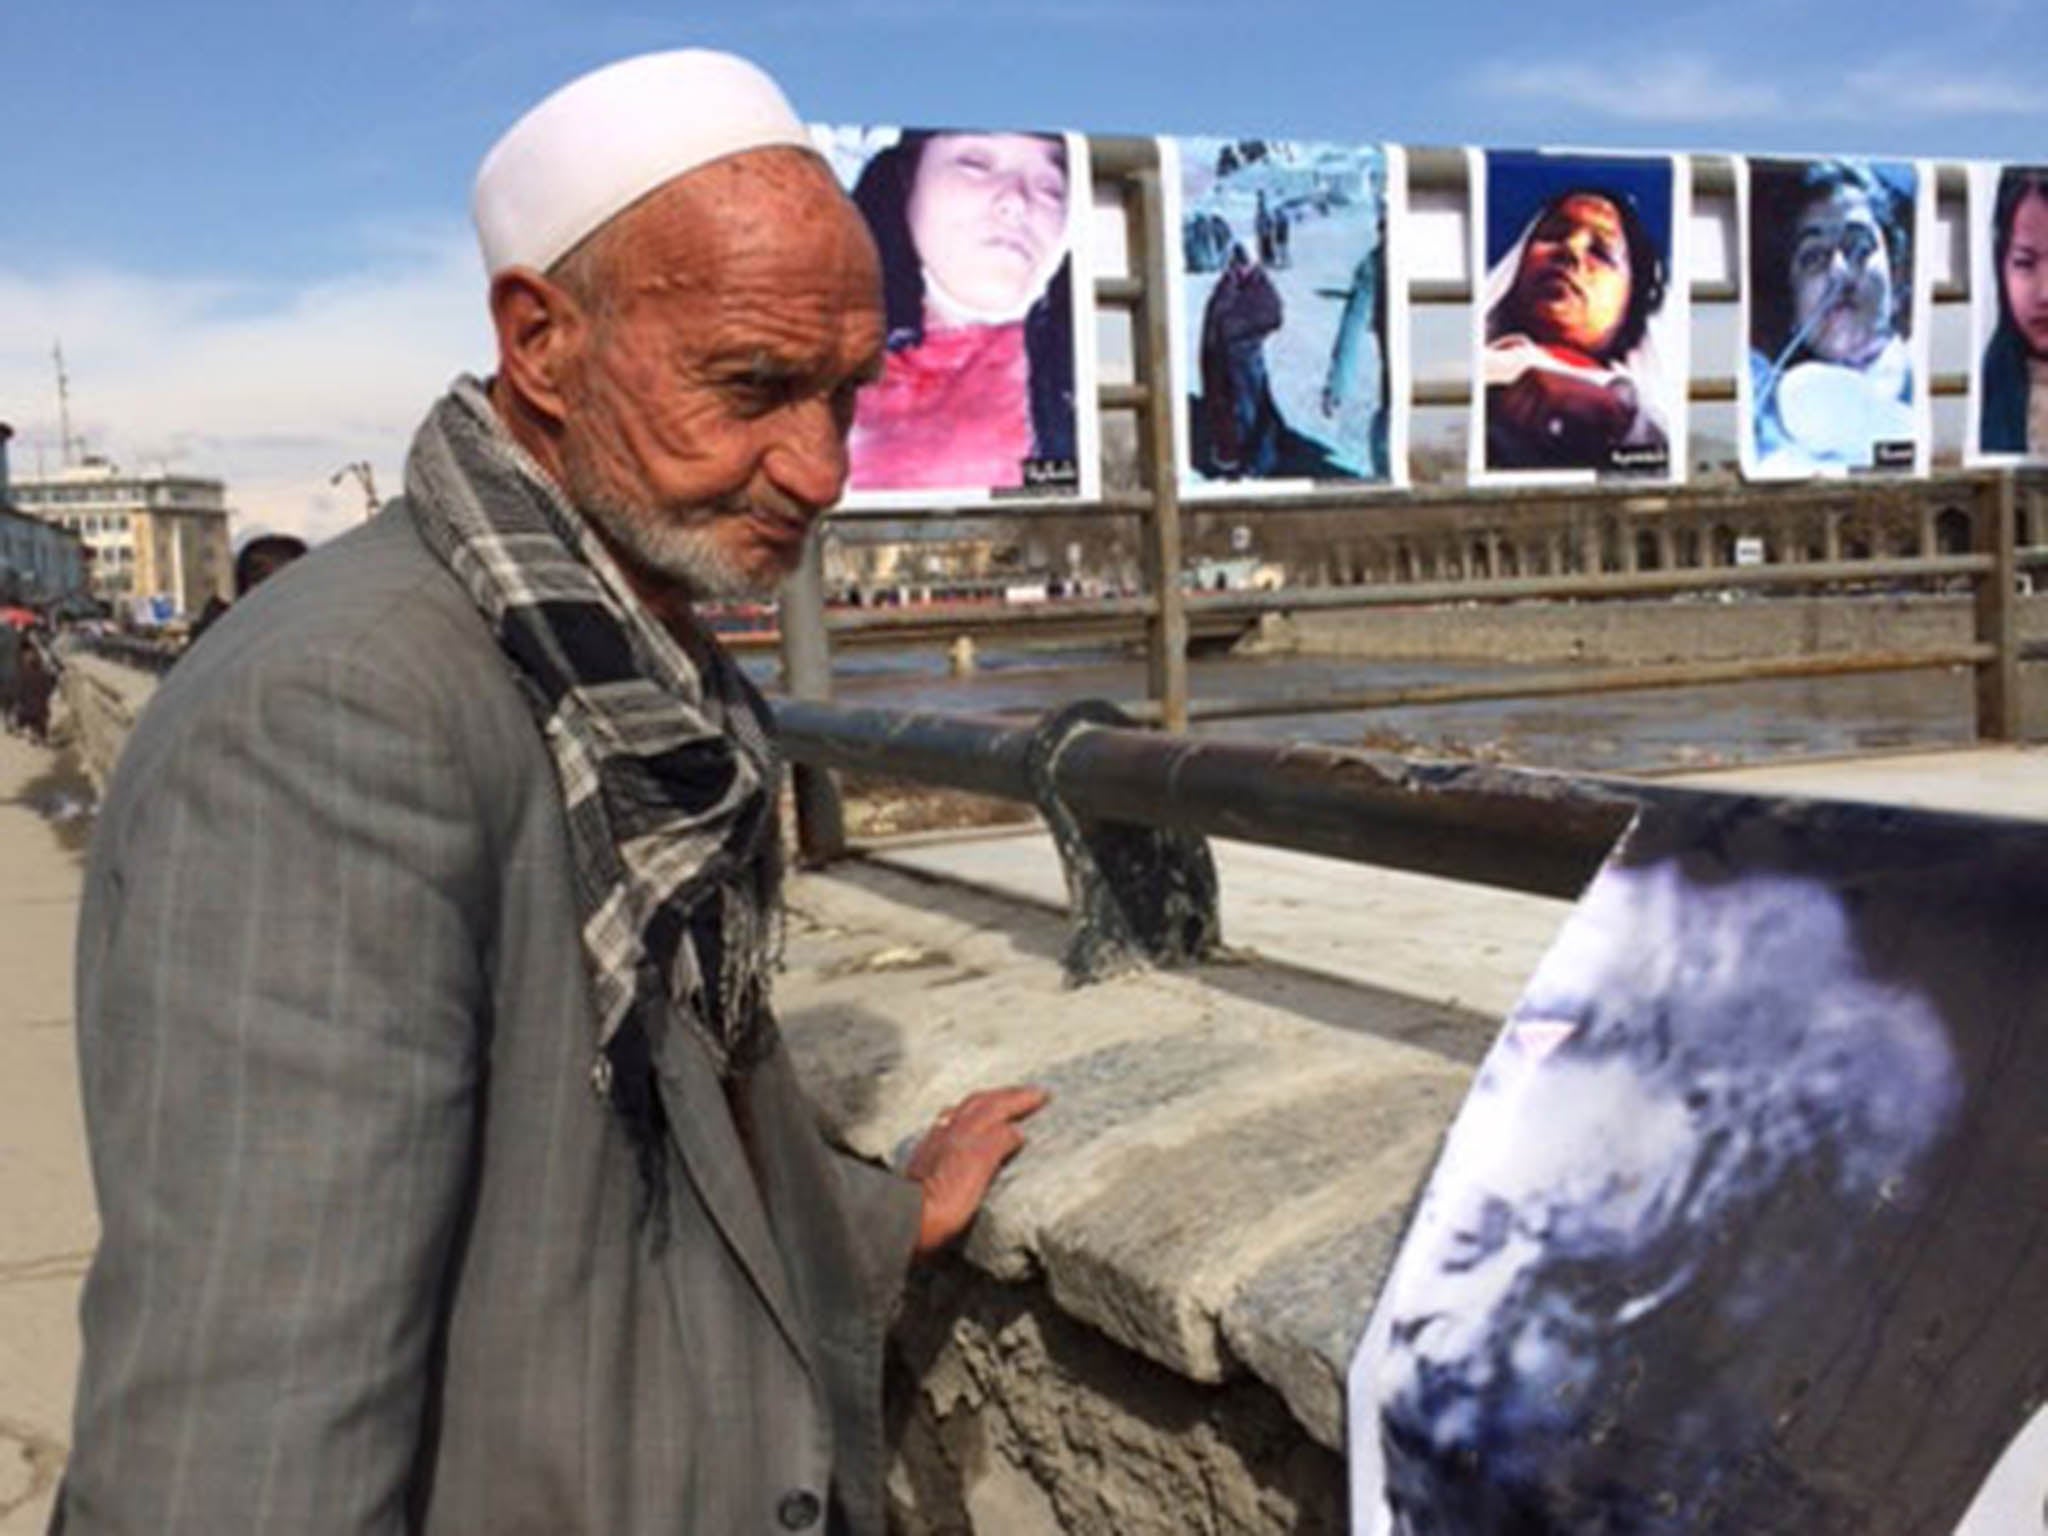 Photos of Farkhunda Malikzada, who was publicly beaten to death, are on display as a reminder of the brutal killing